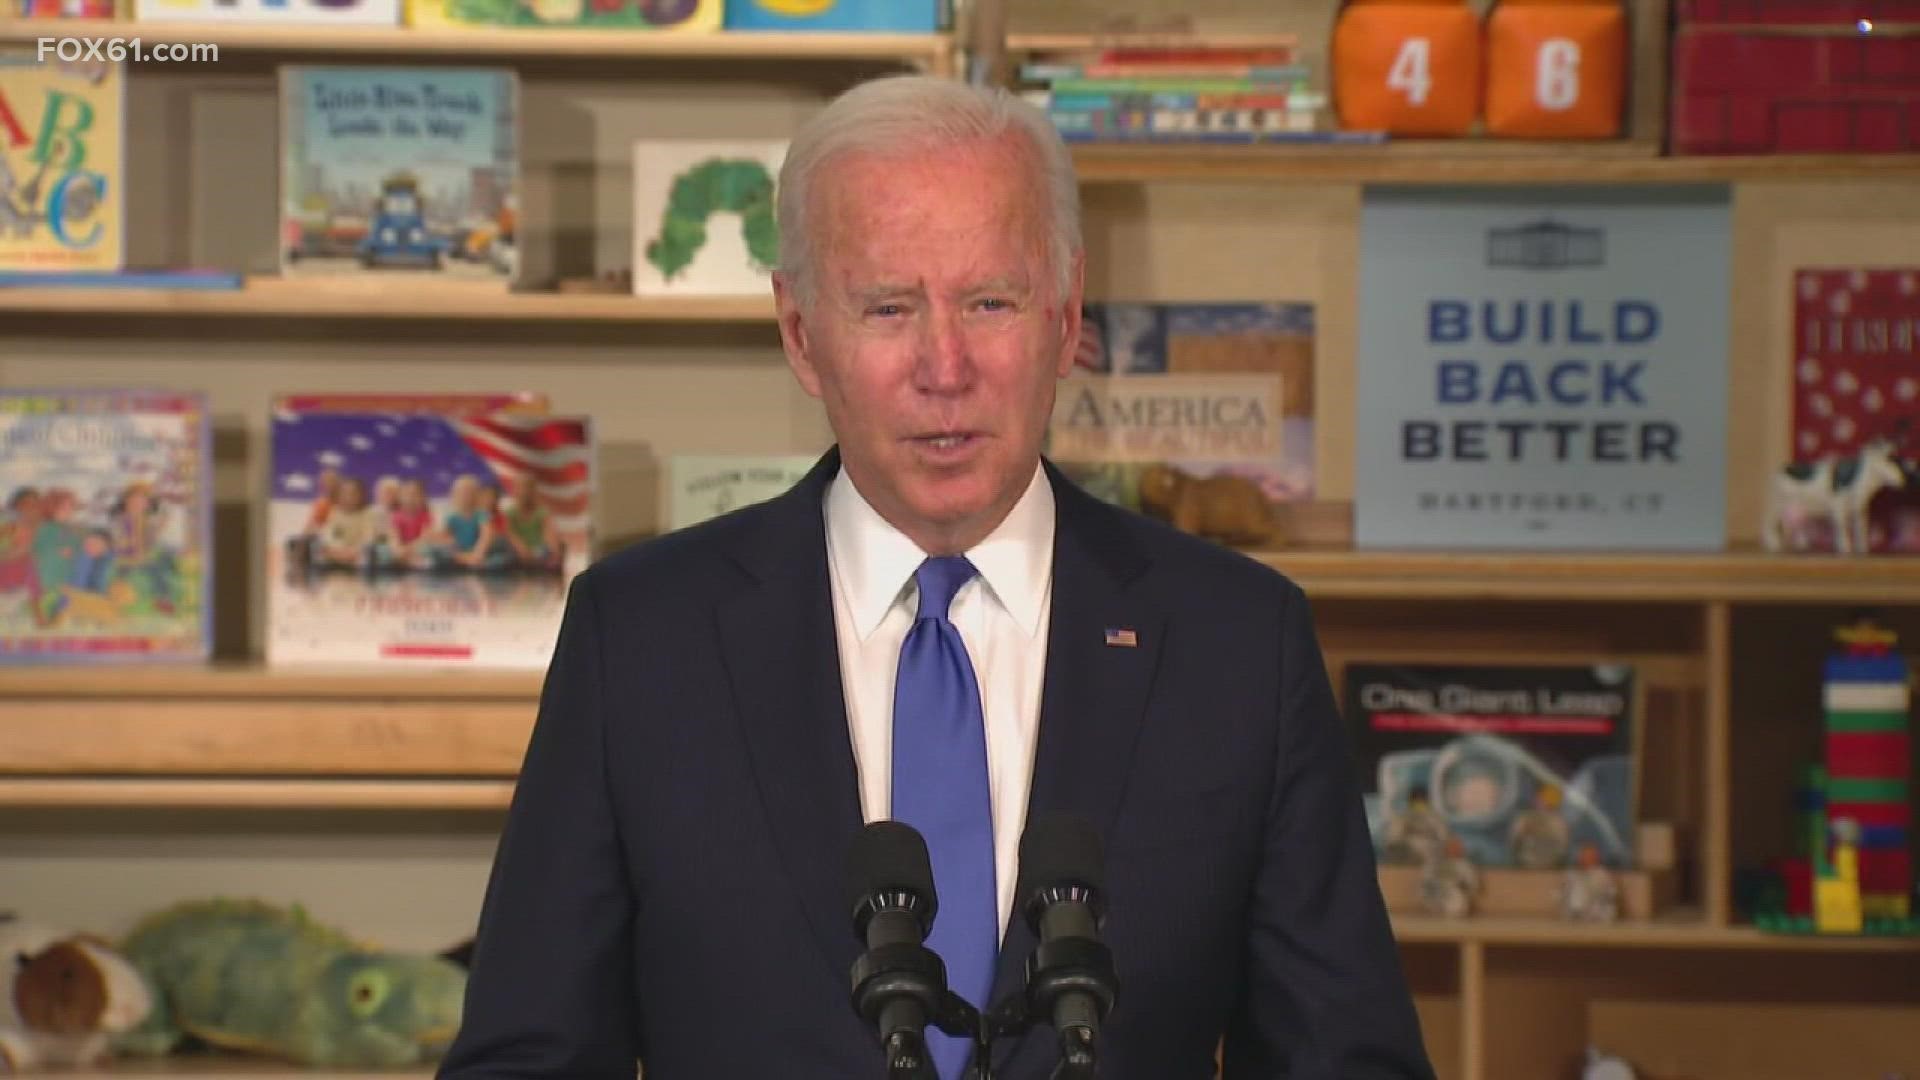 Biden talked about his Build Back Better agenda in Hartford, highlighting the need to invest in child care, before heading to UConn.